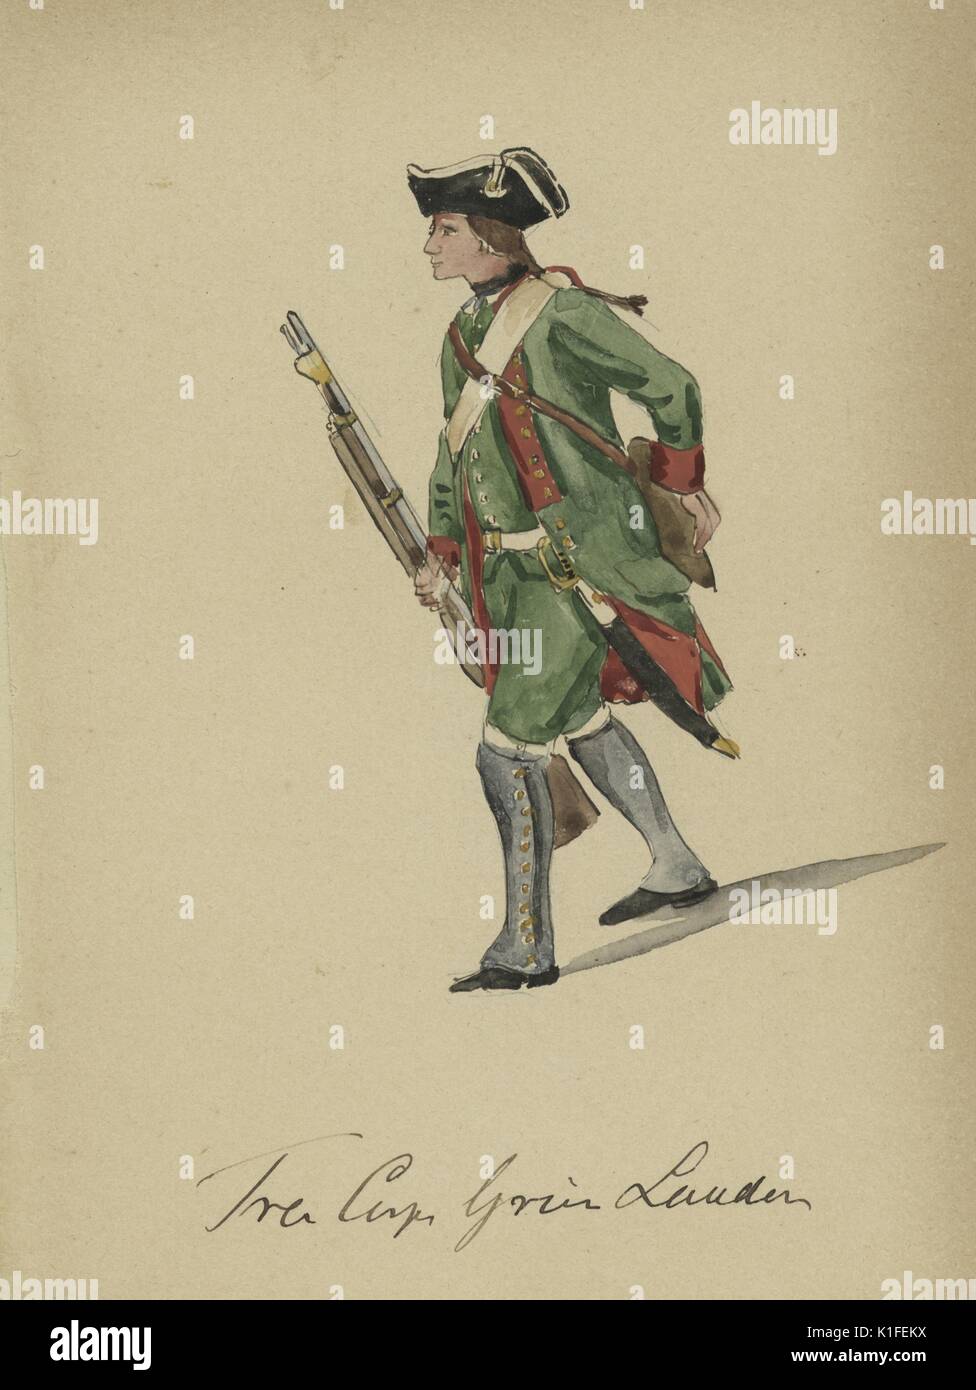 Color image of a soldier titled Frei Corps Grun Landon, Landon Green Free Corps, Amsterdam, 1758. From the New York Public Library. Stock Photo